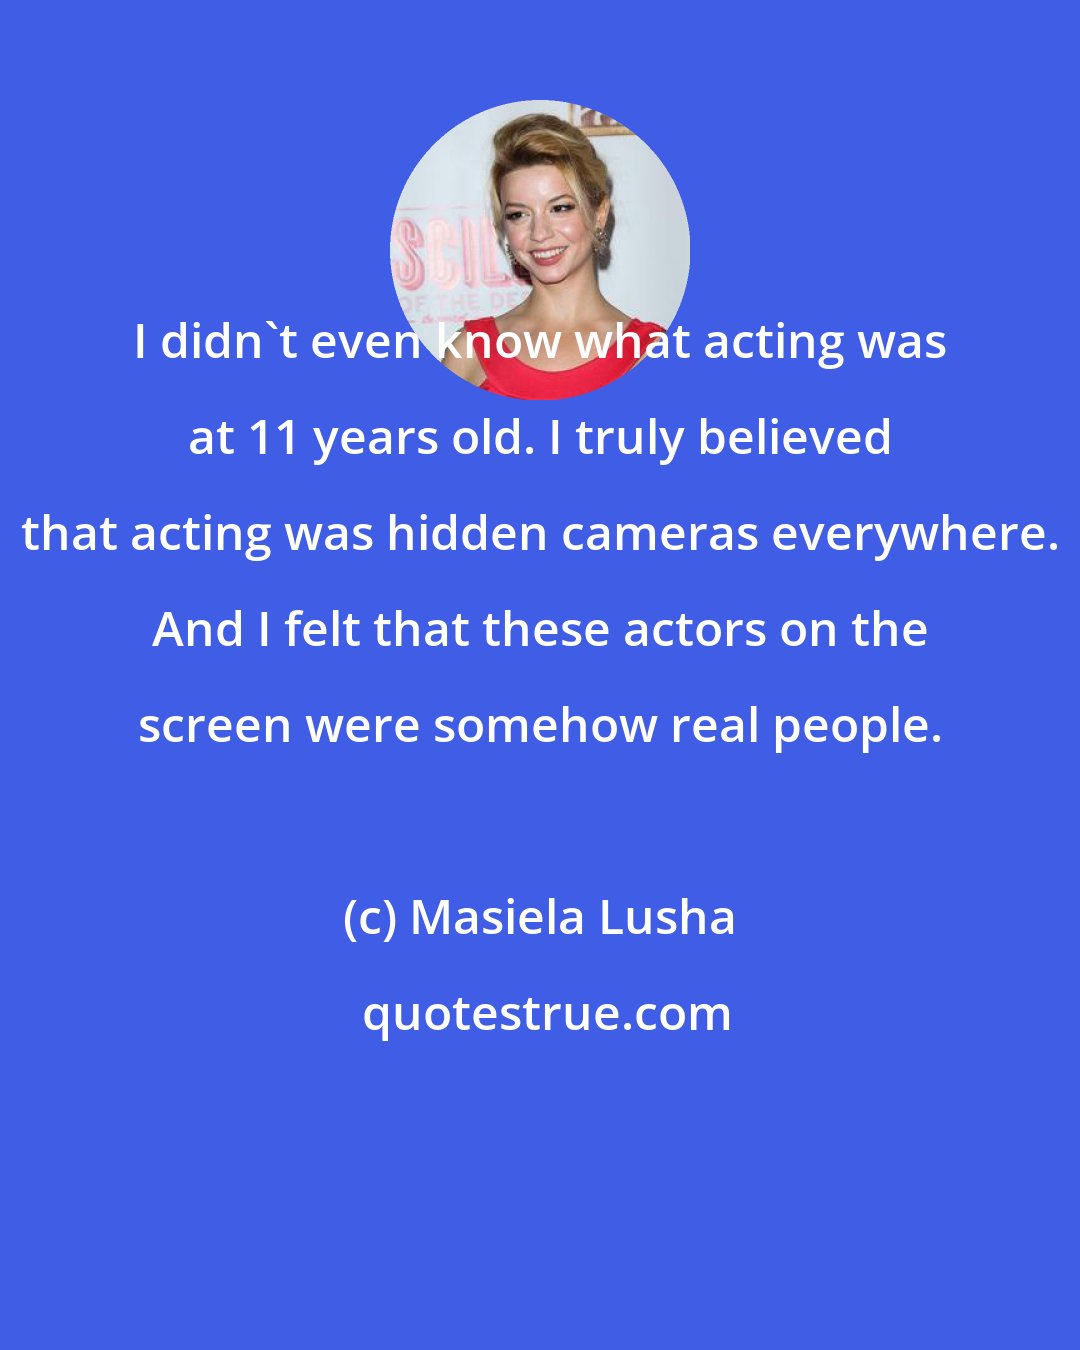 Masiela Lusha: I didn't even know what acting was at 11 years old. I truly believed that acting was hidden cameras everywhere. And I felt that these actors on the screen were somehow real people.